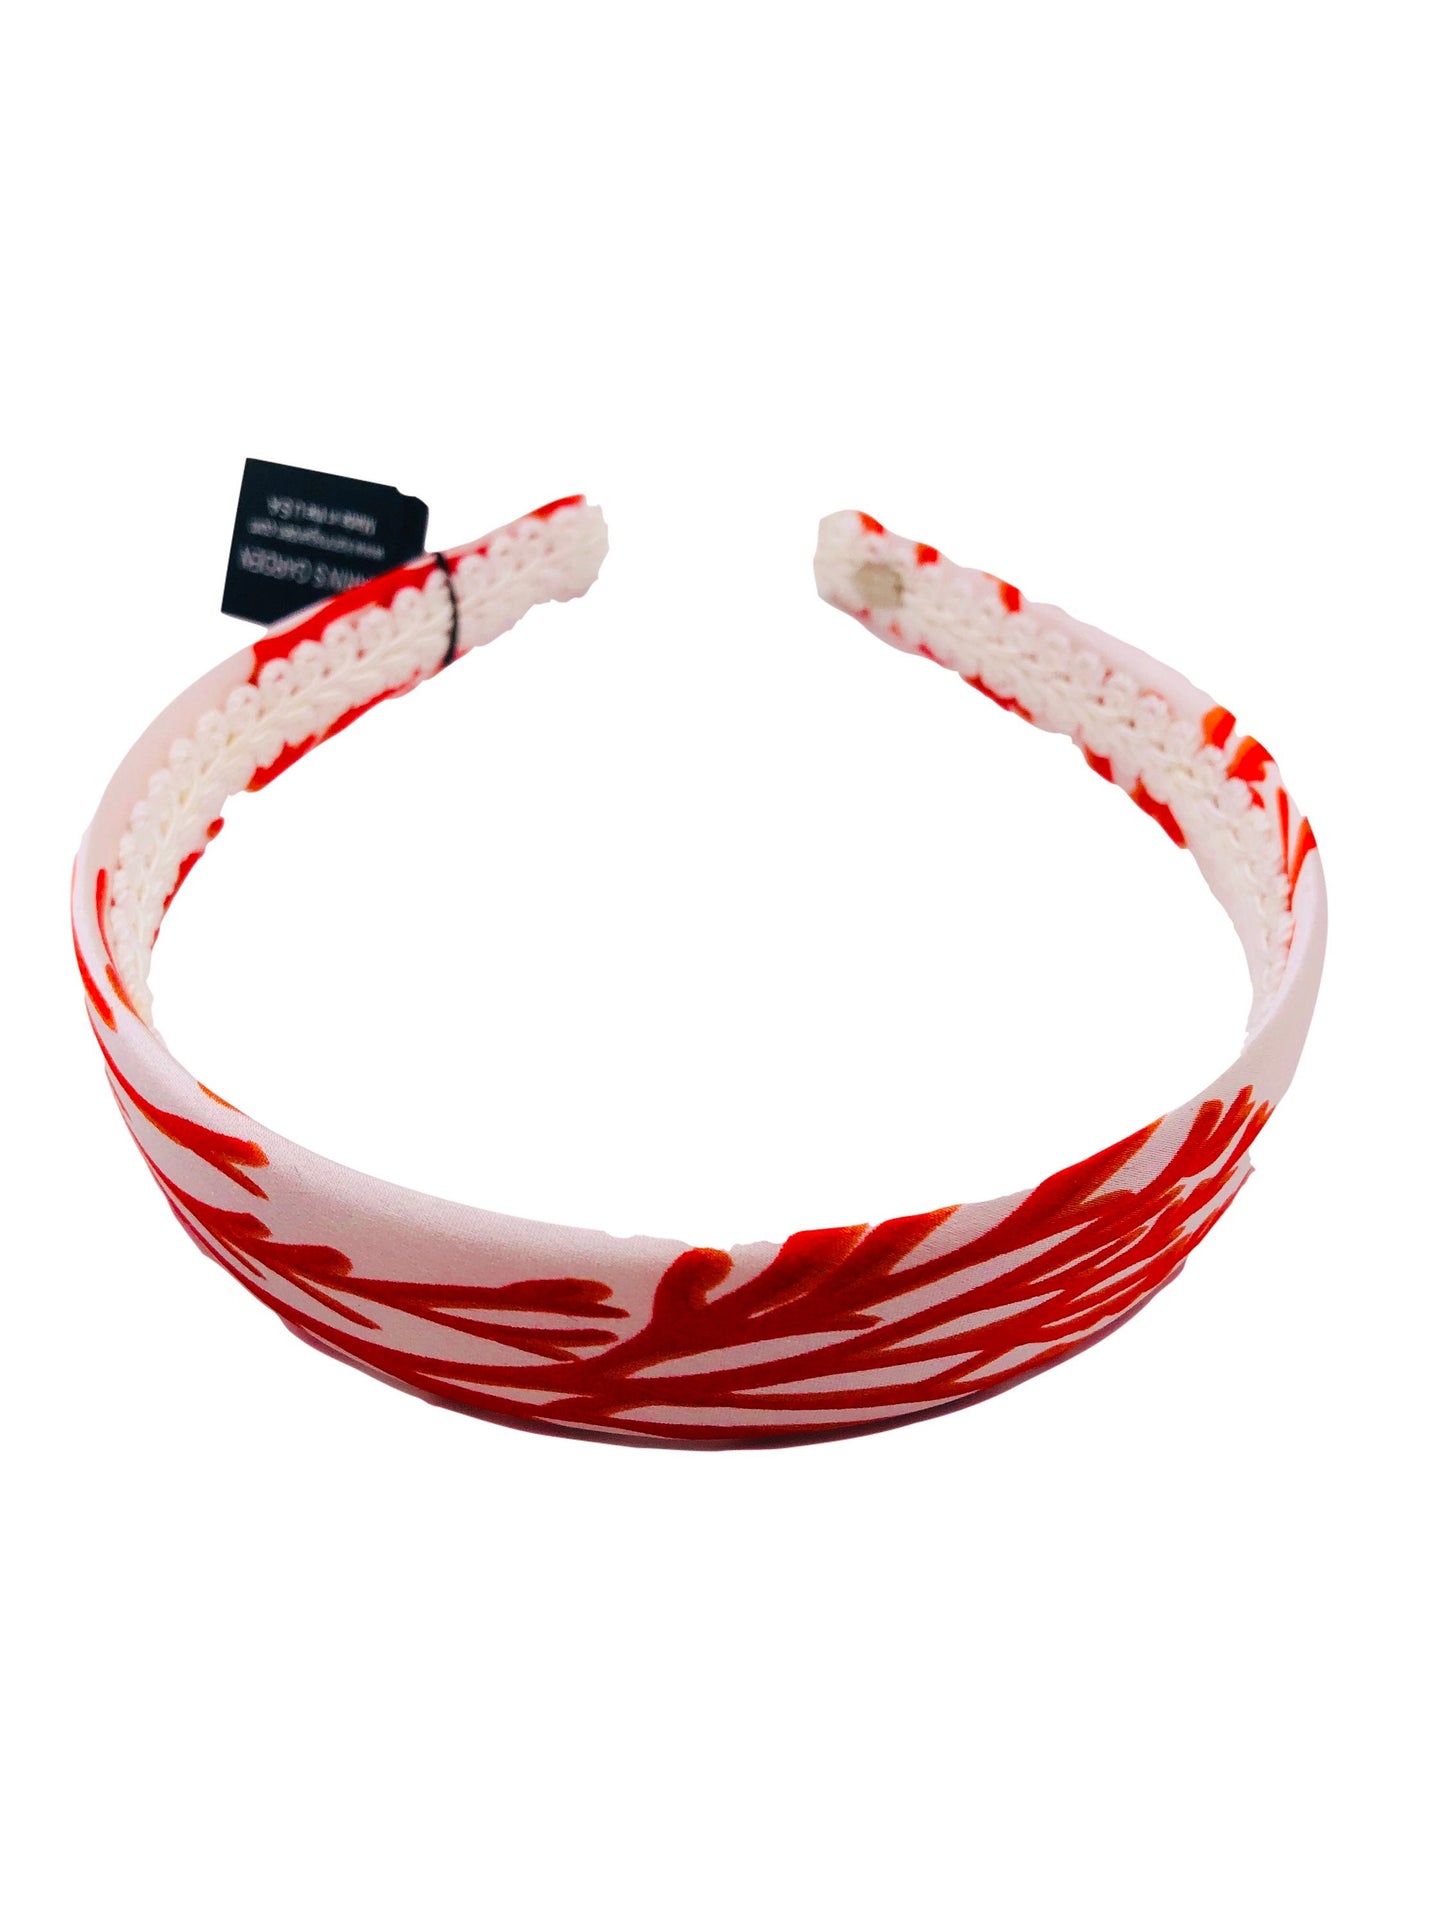 Karin's Garden 1" Silk Charmeuse Coral Headband Handmade in the USA In White or Turquoise